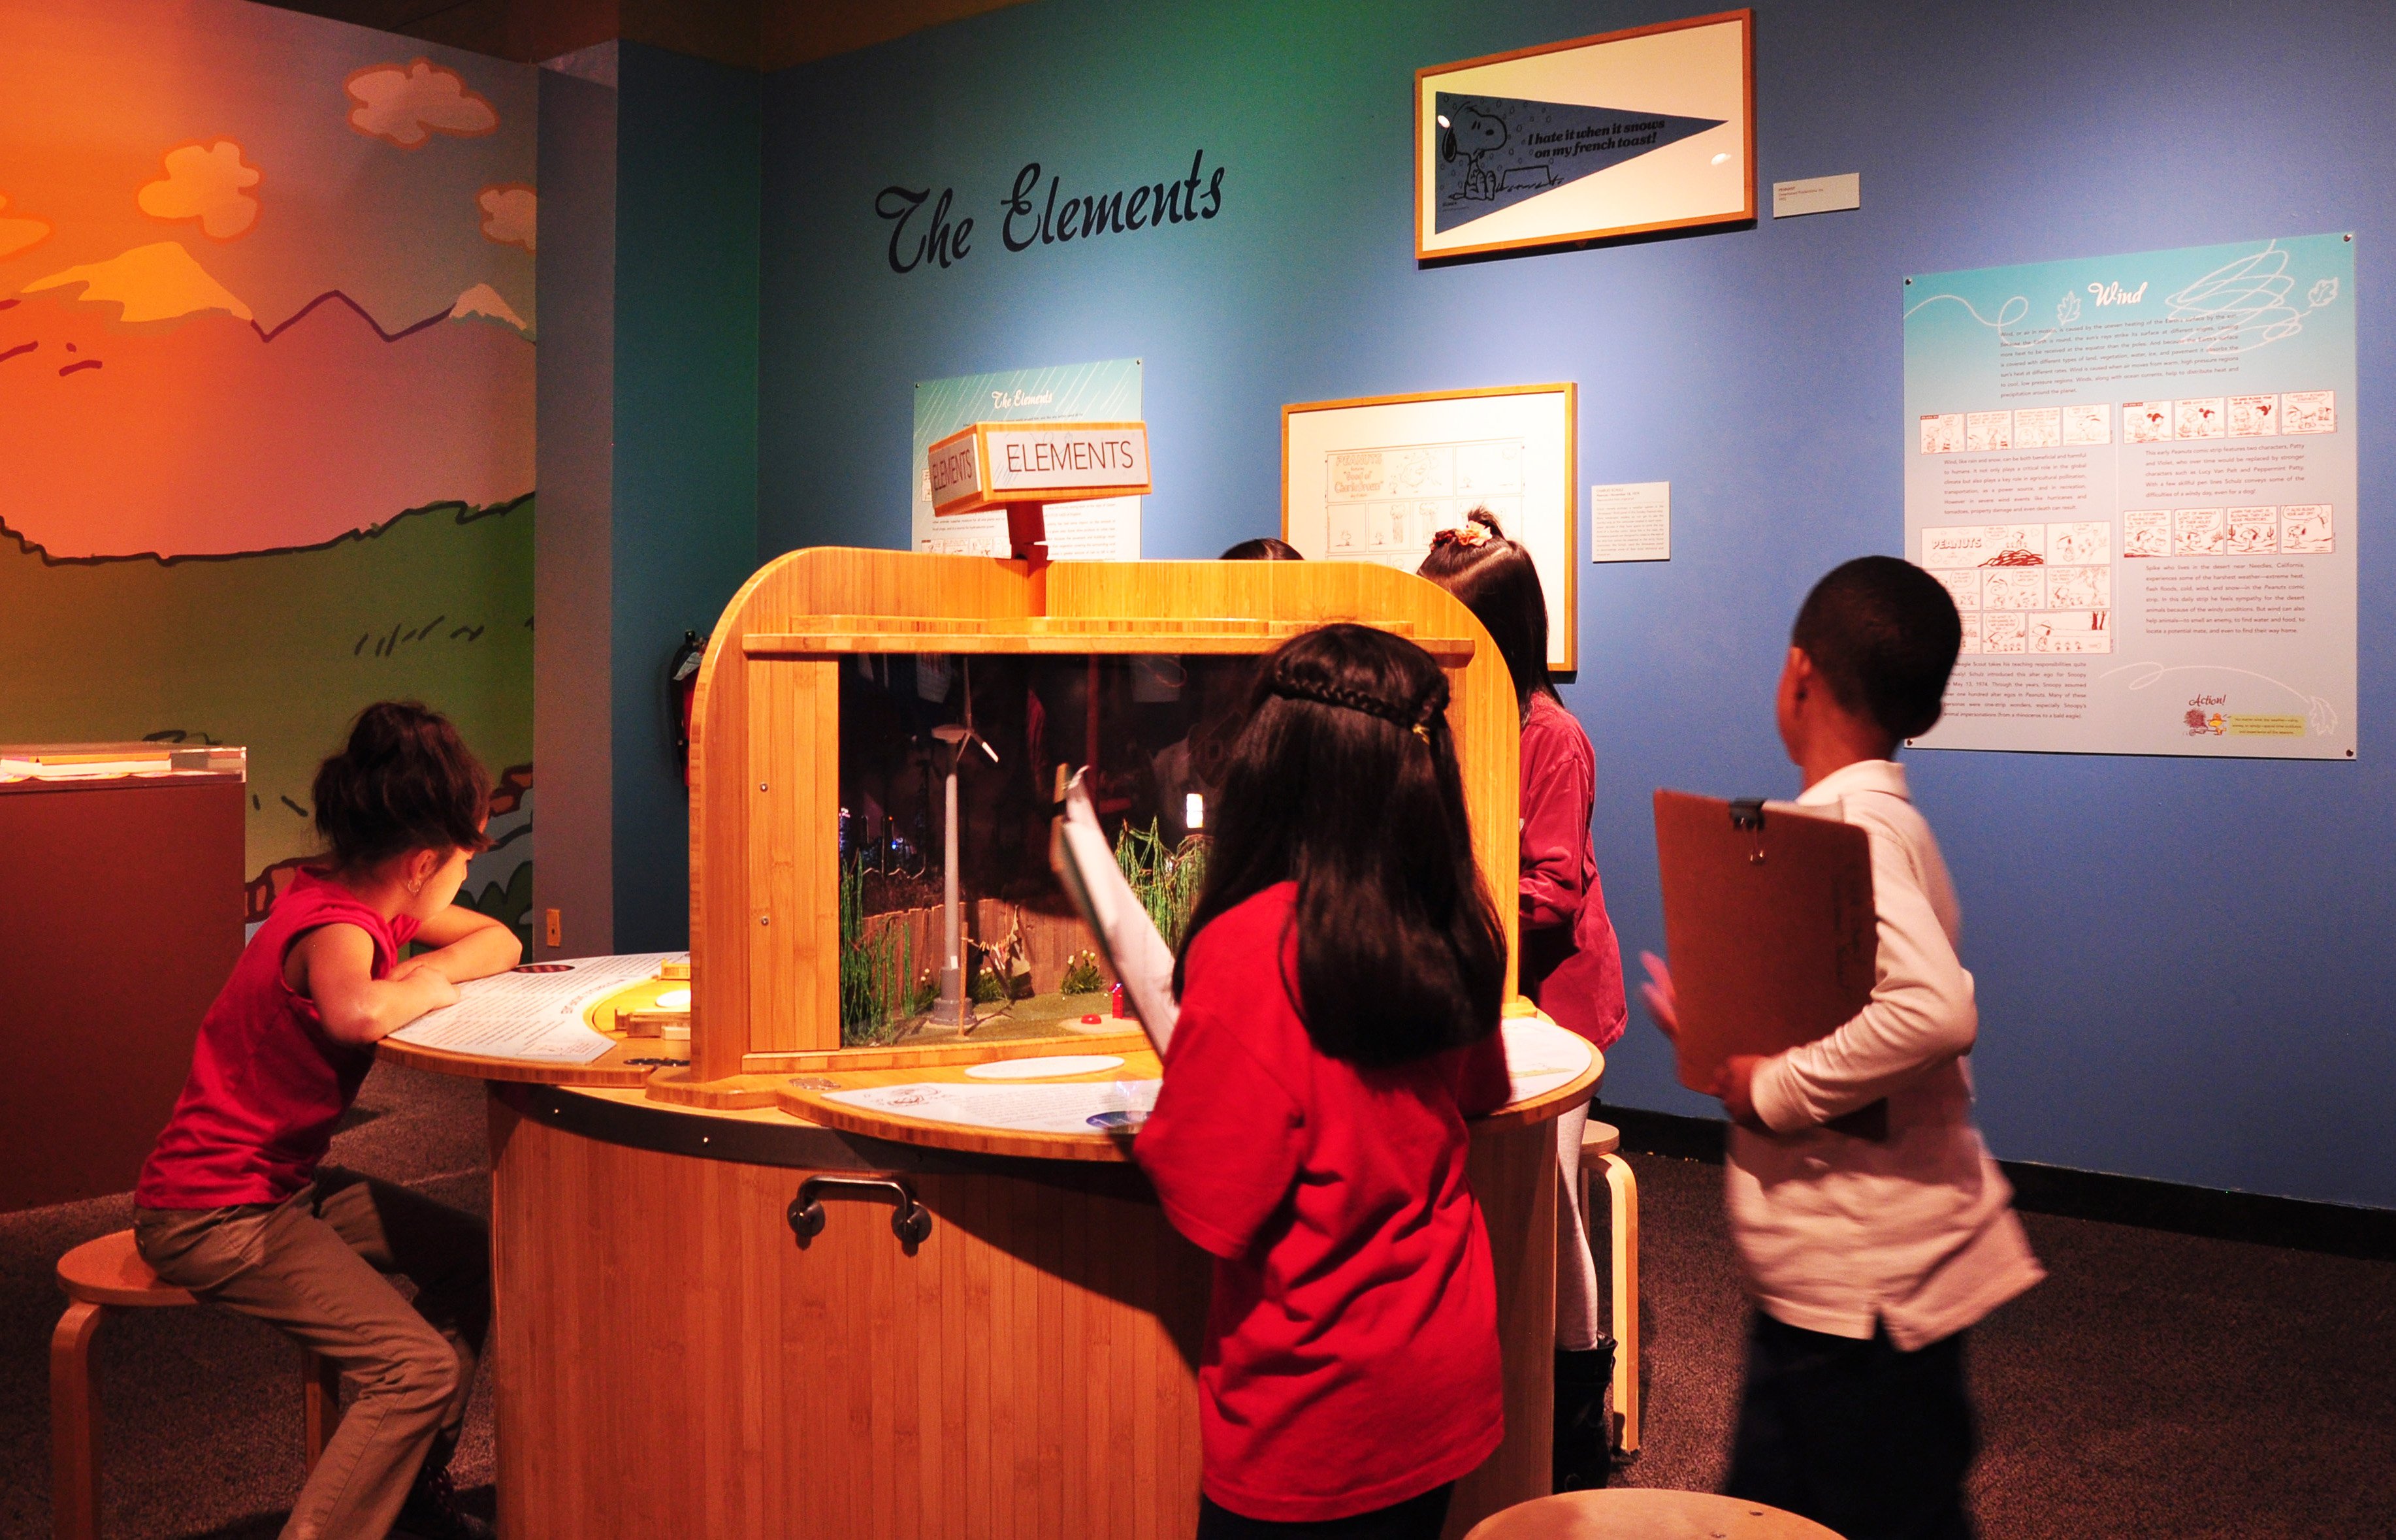 Children learn about wind and other elements at the "Peanuts ... Naturally" exhibit. (Sean Keenehan)